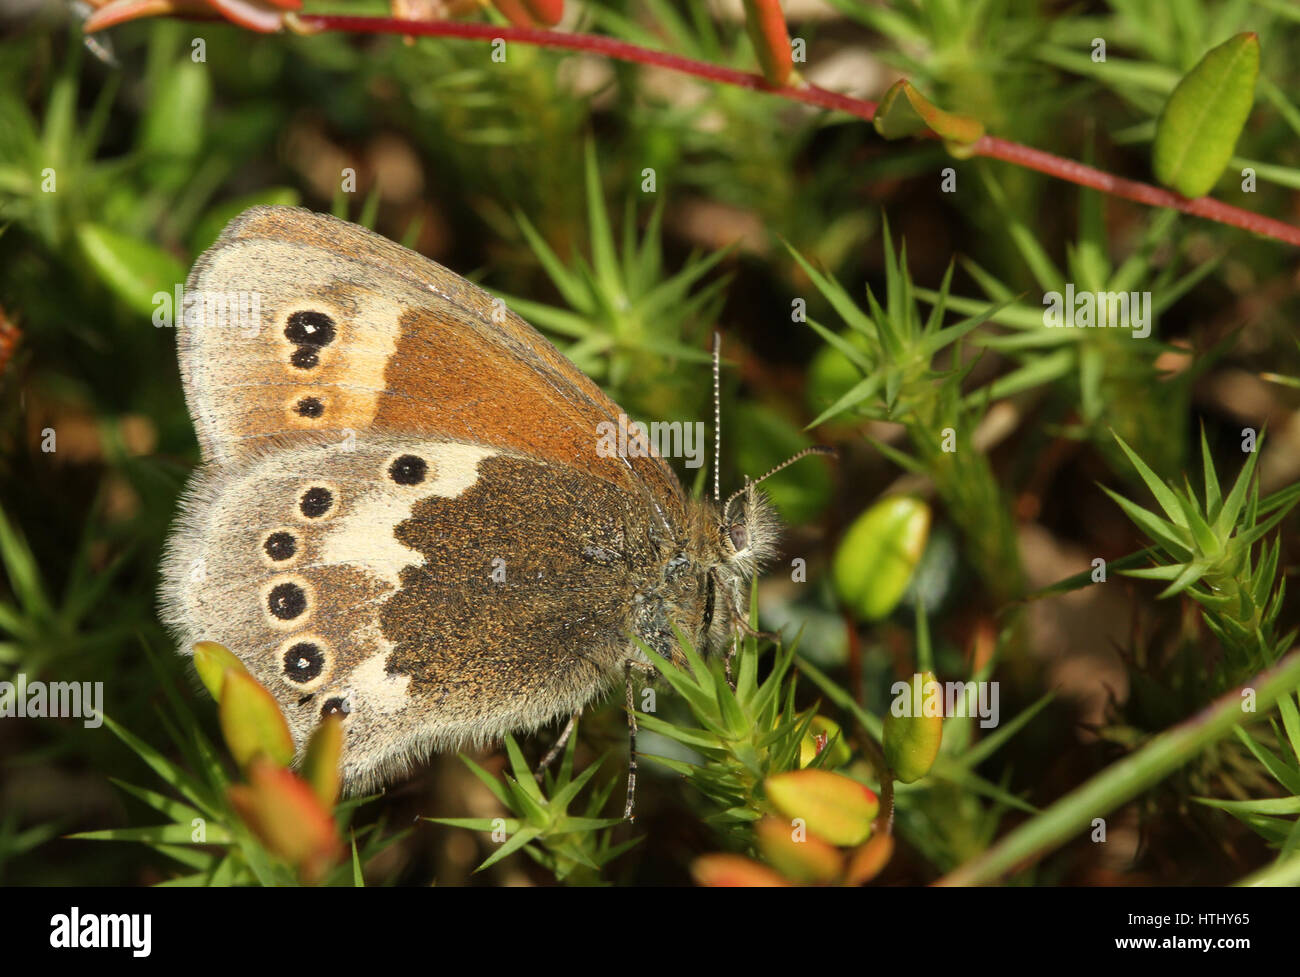 The side view of a Large Heath Butterfly (Coenonympha tullia) perched on Moss with its wings closed. Stock Photo